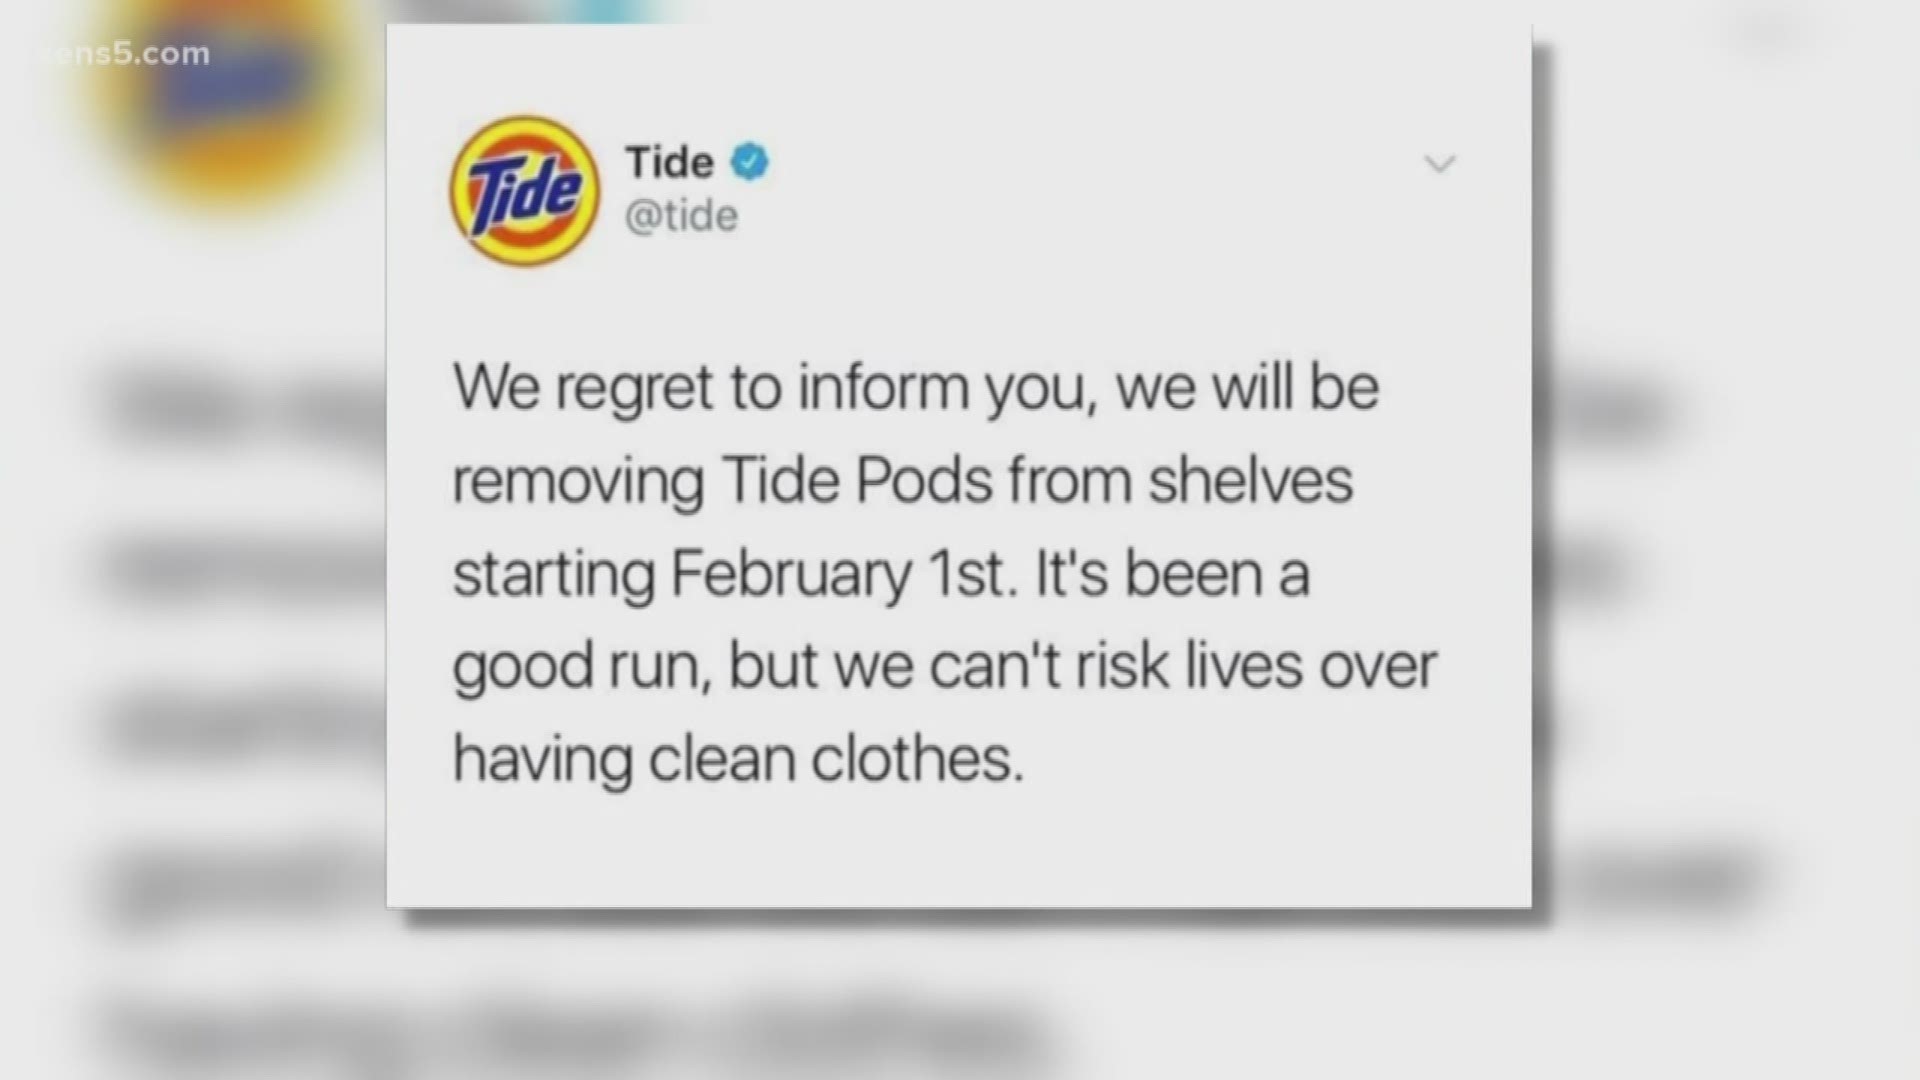 Despite a viral tweet that seems to indicate otherwise, Tide will not be discontinuing Tide pods.